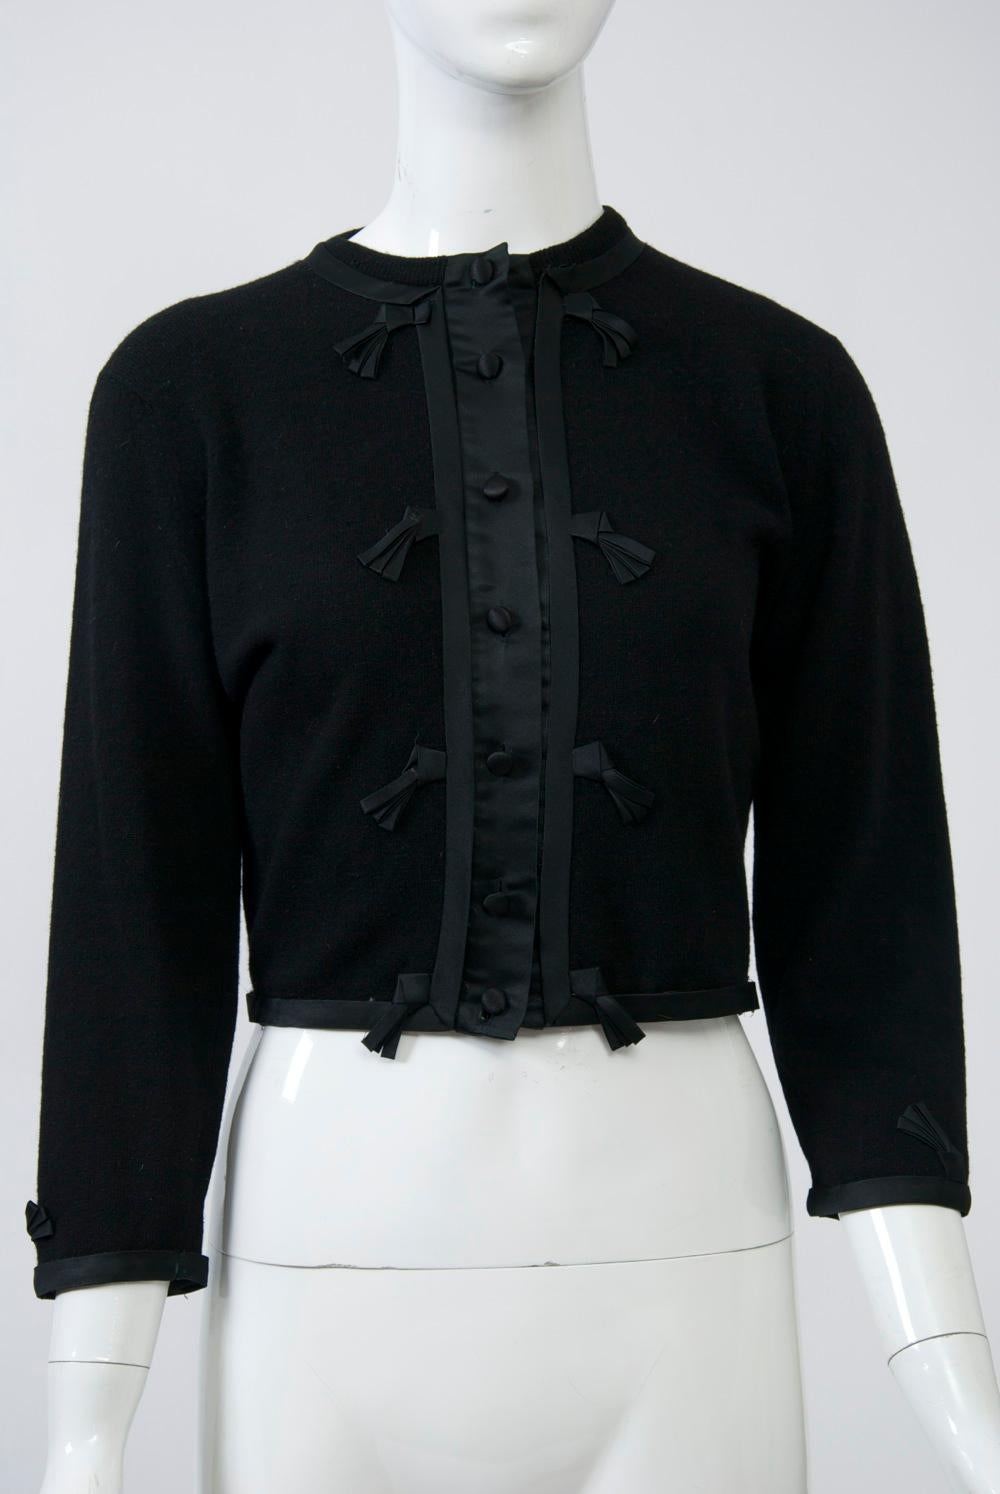 Cropped vintage cardigan in black cashmere featuring black satin trim further adorned with small fringe detail. Matching satin buttons. Unlined. A lovely example of the embellished cardigans popular during the 1950s and ‘60s. Petite/small size.